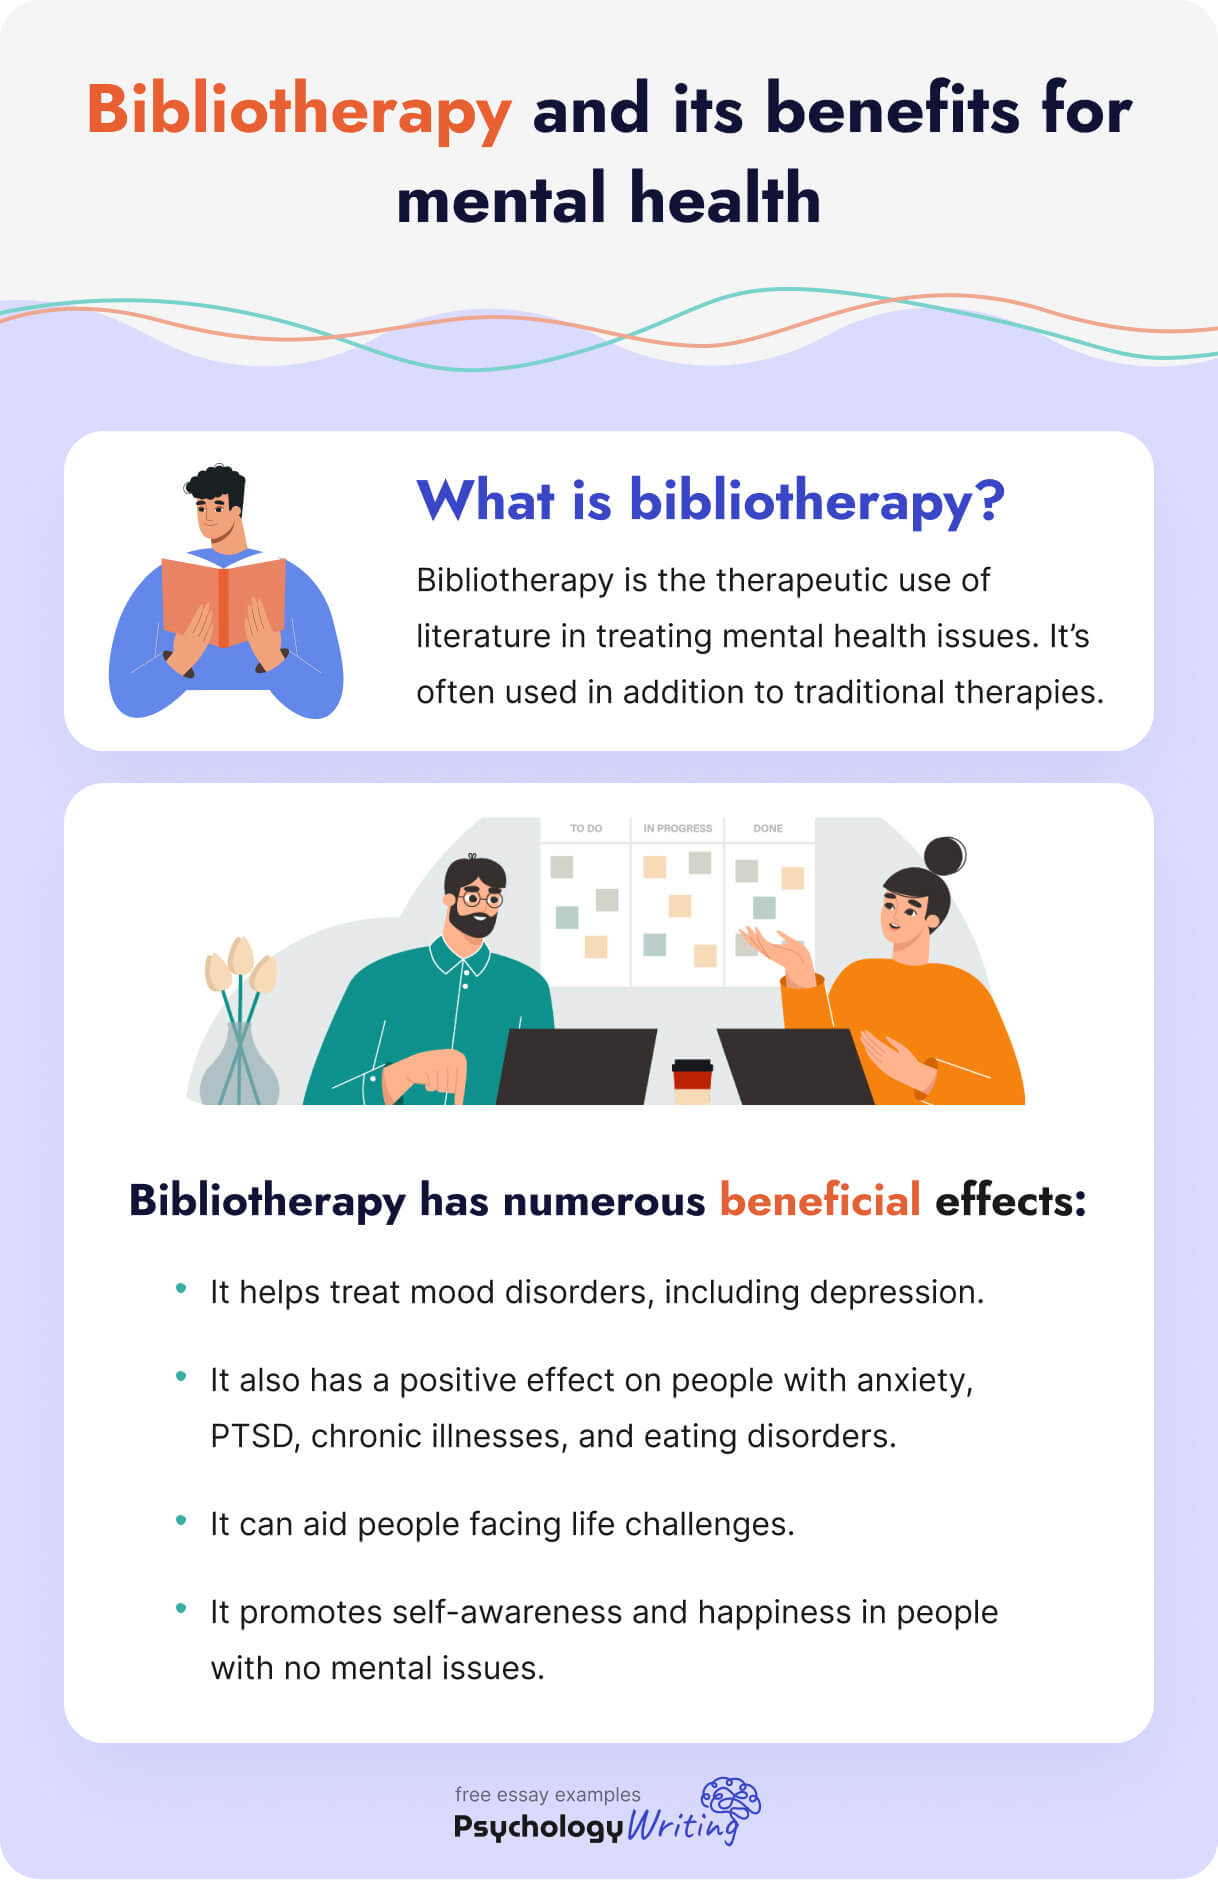 Definition of bibliotherapy and its benefits for mental health.